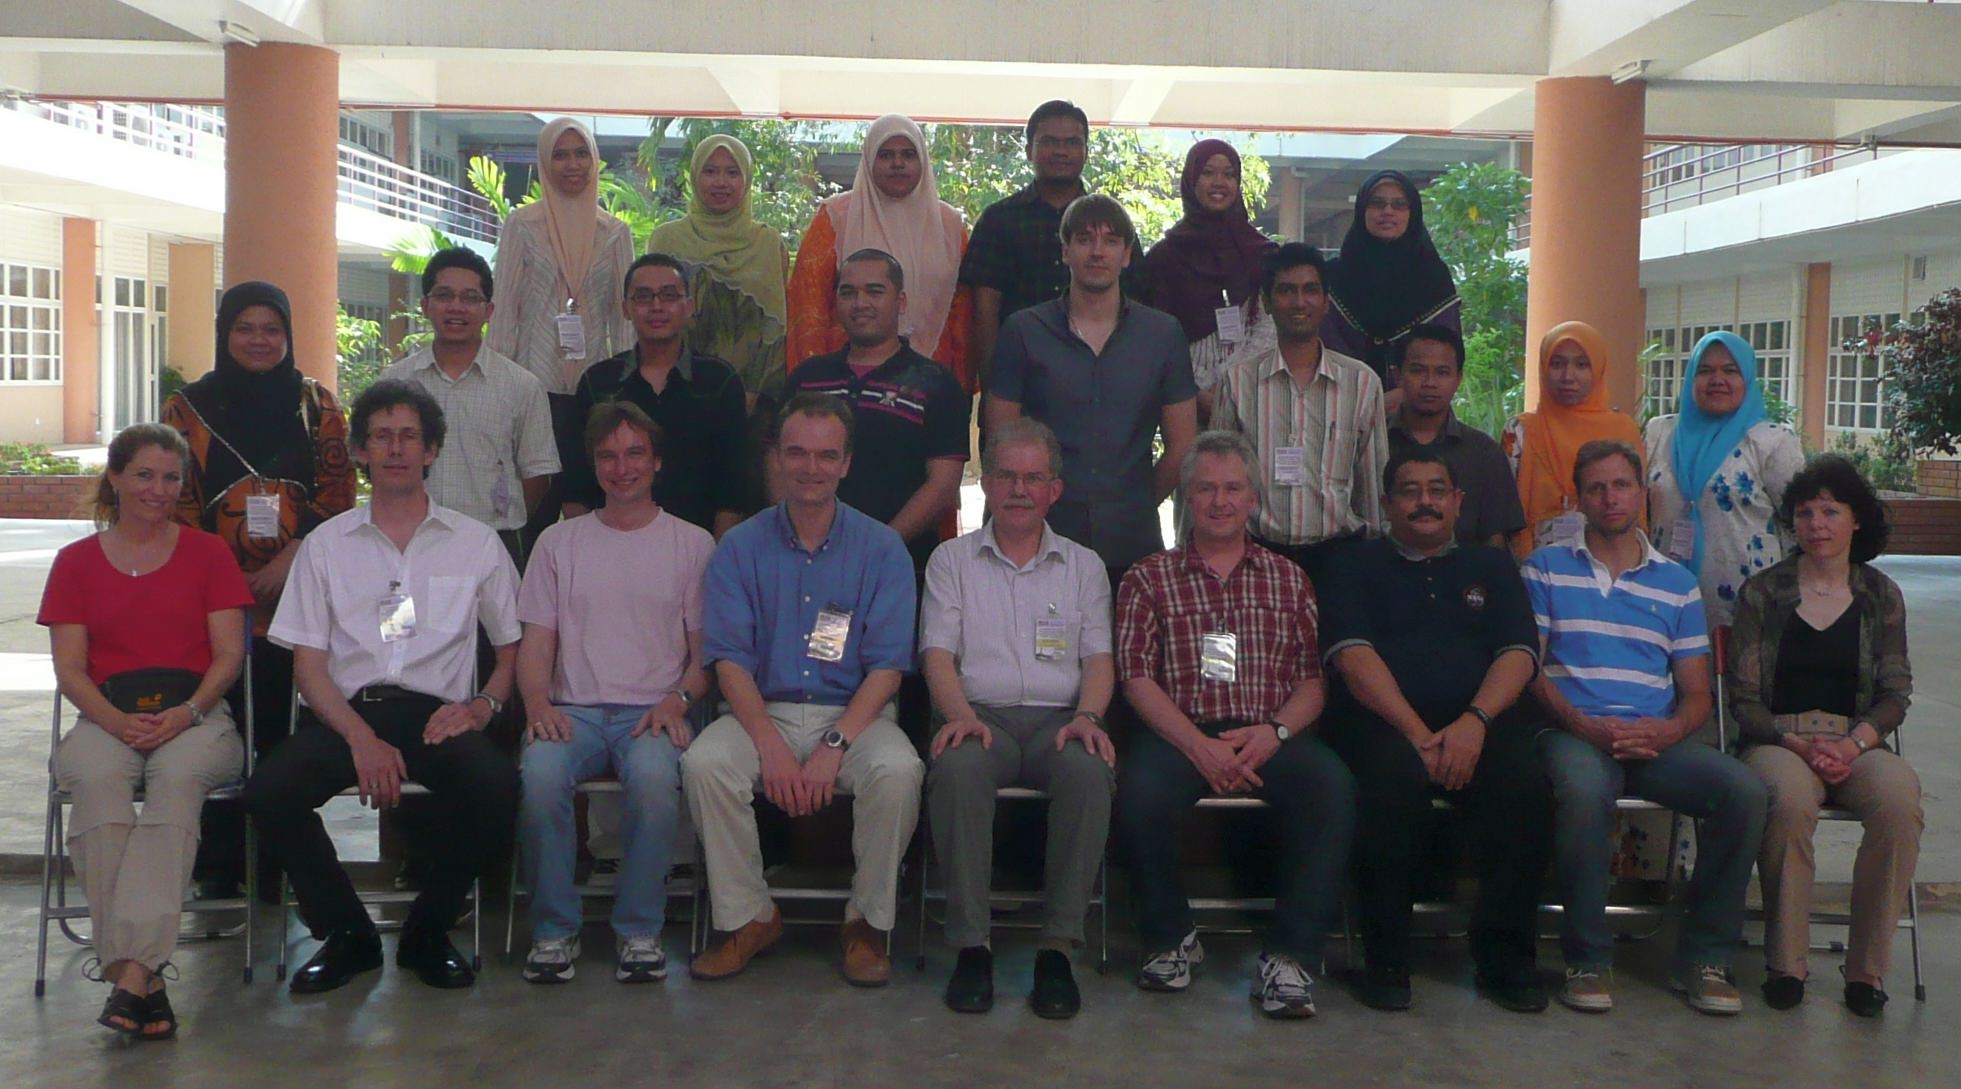 Polder with the 2009 Summer School Class in Malaysia where he teaches electrophysiology.